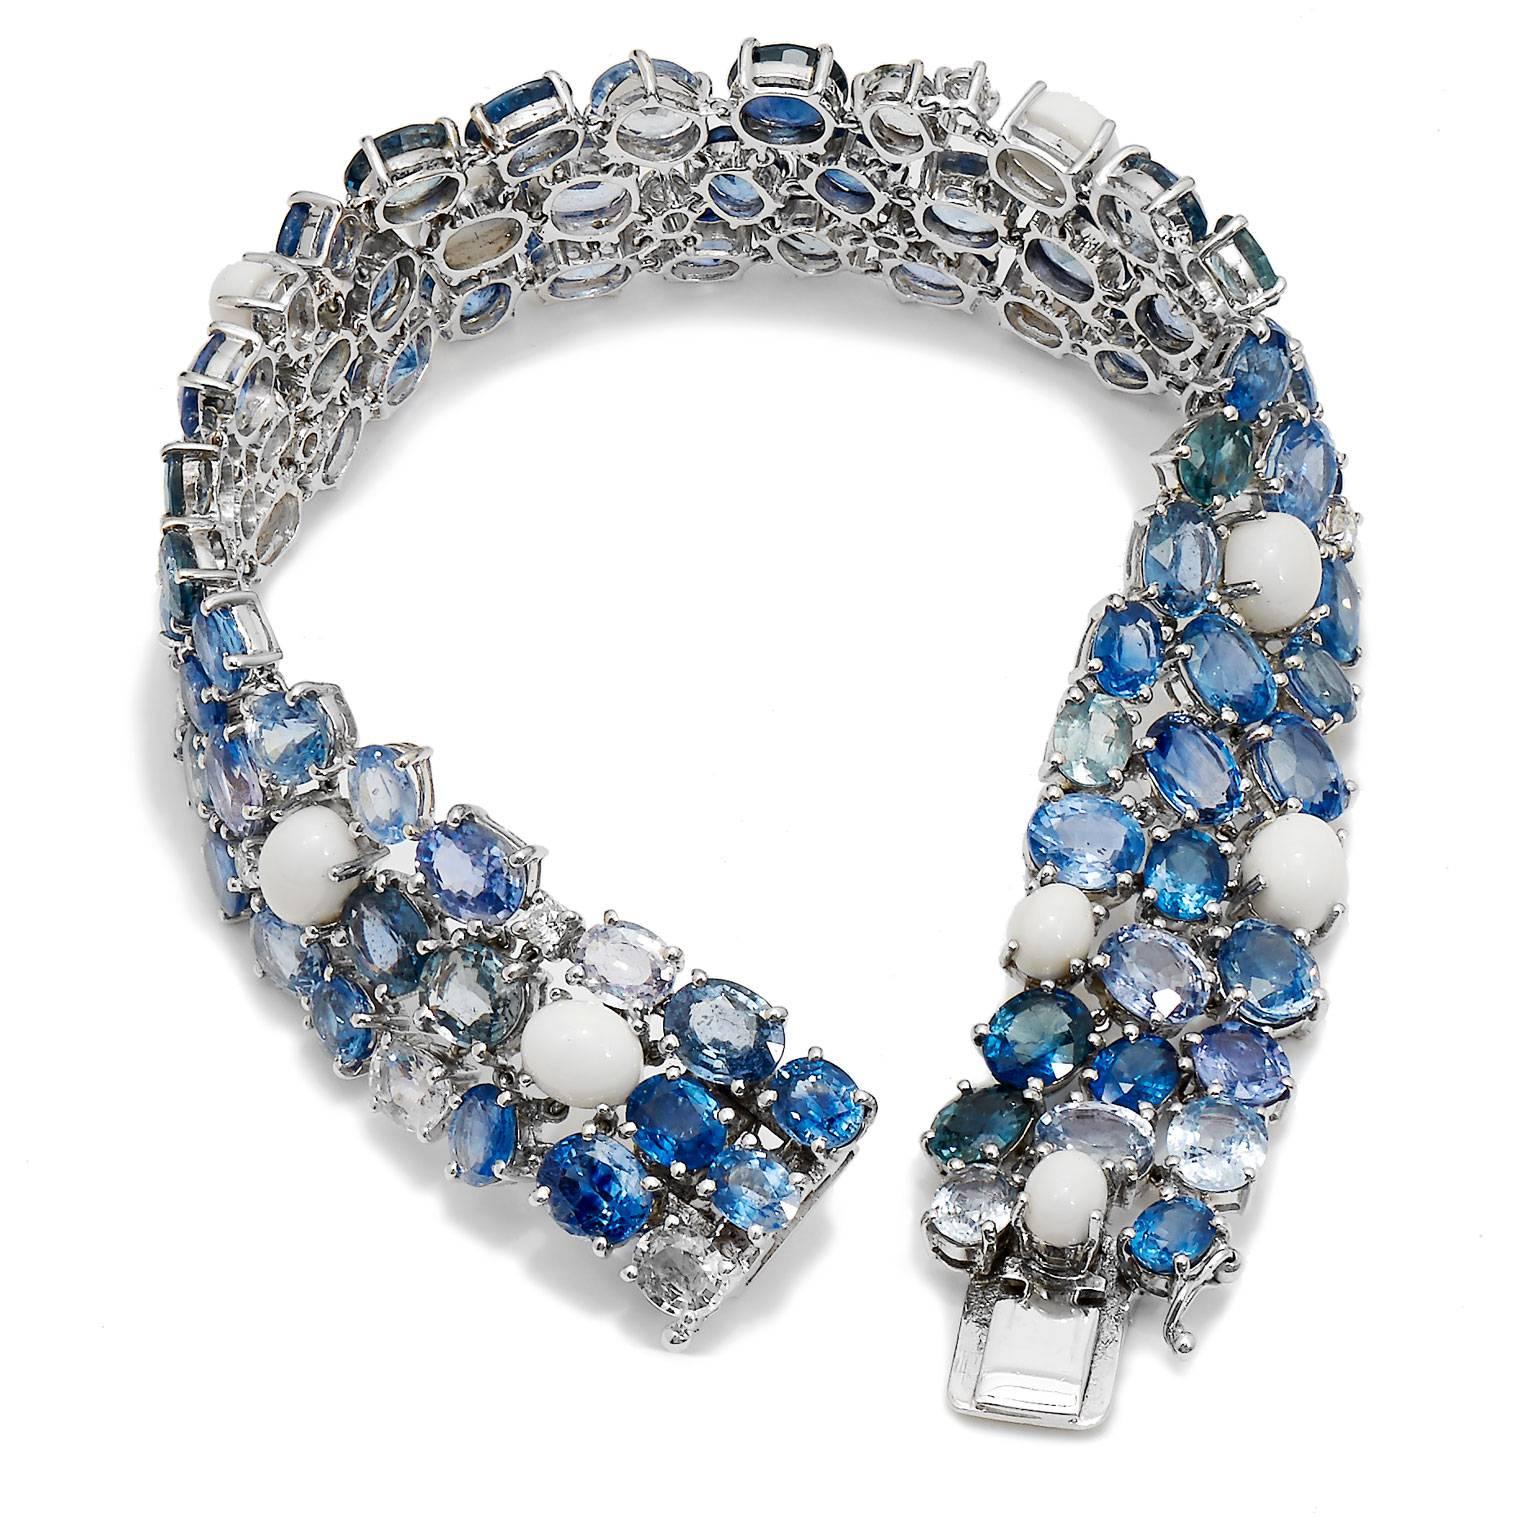 Paint the sky with varying hues of blue sapphires in this 18 kt white gold bracelet. 0.16 ct diamonds punctuate the vast expanse of 49.89 ct of multi-color blue sapphires, while delicate and pristine white coral float like clouds. Elevate her style